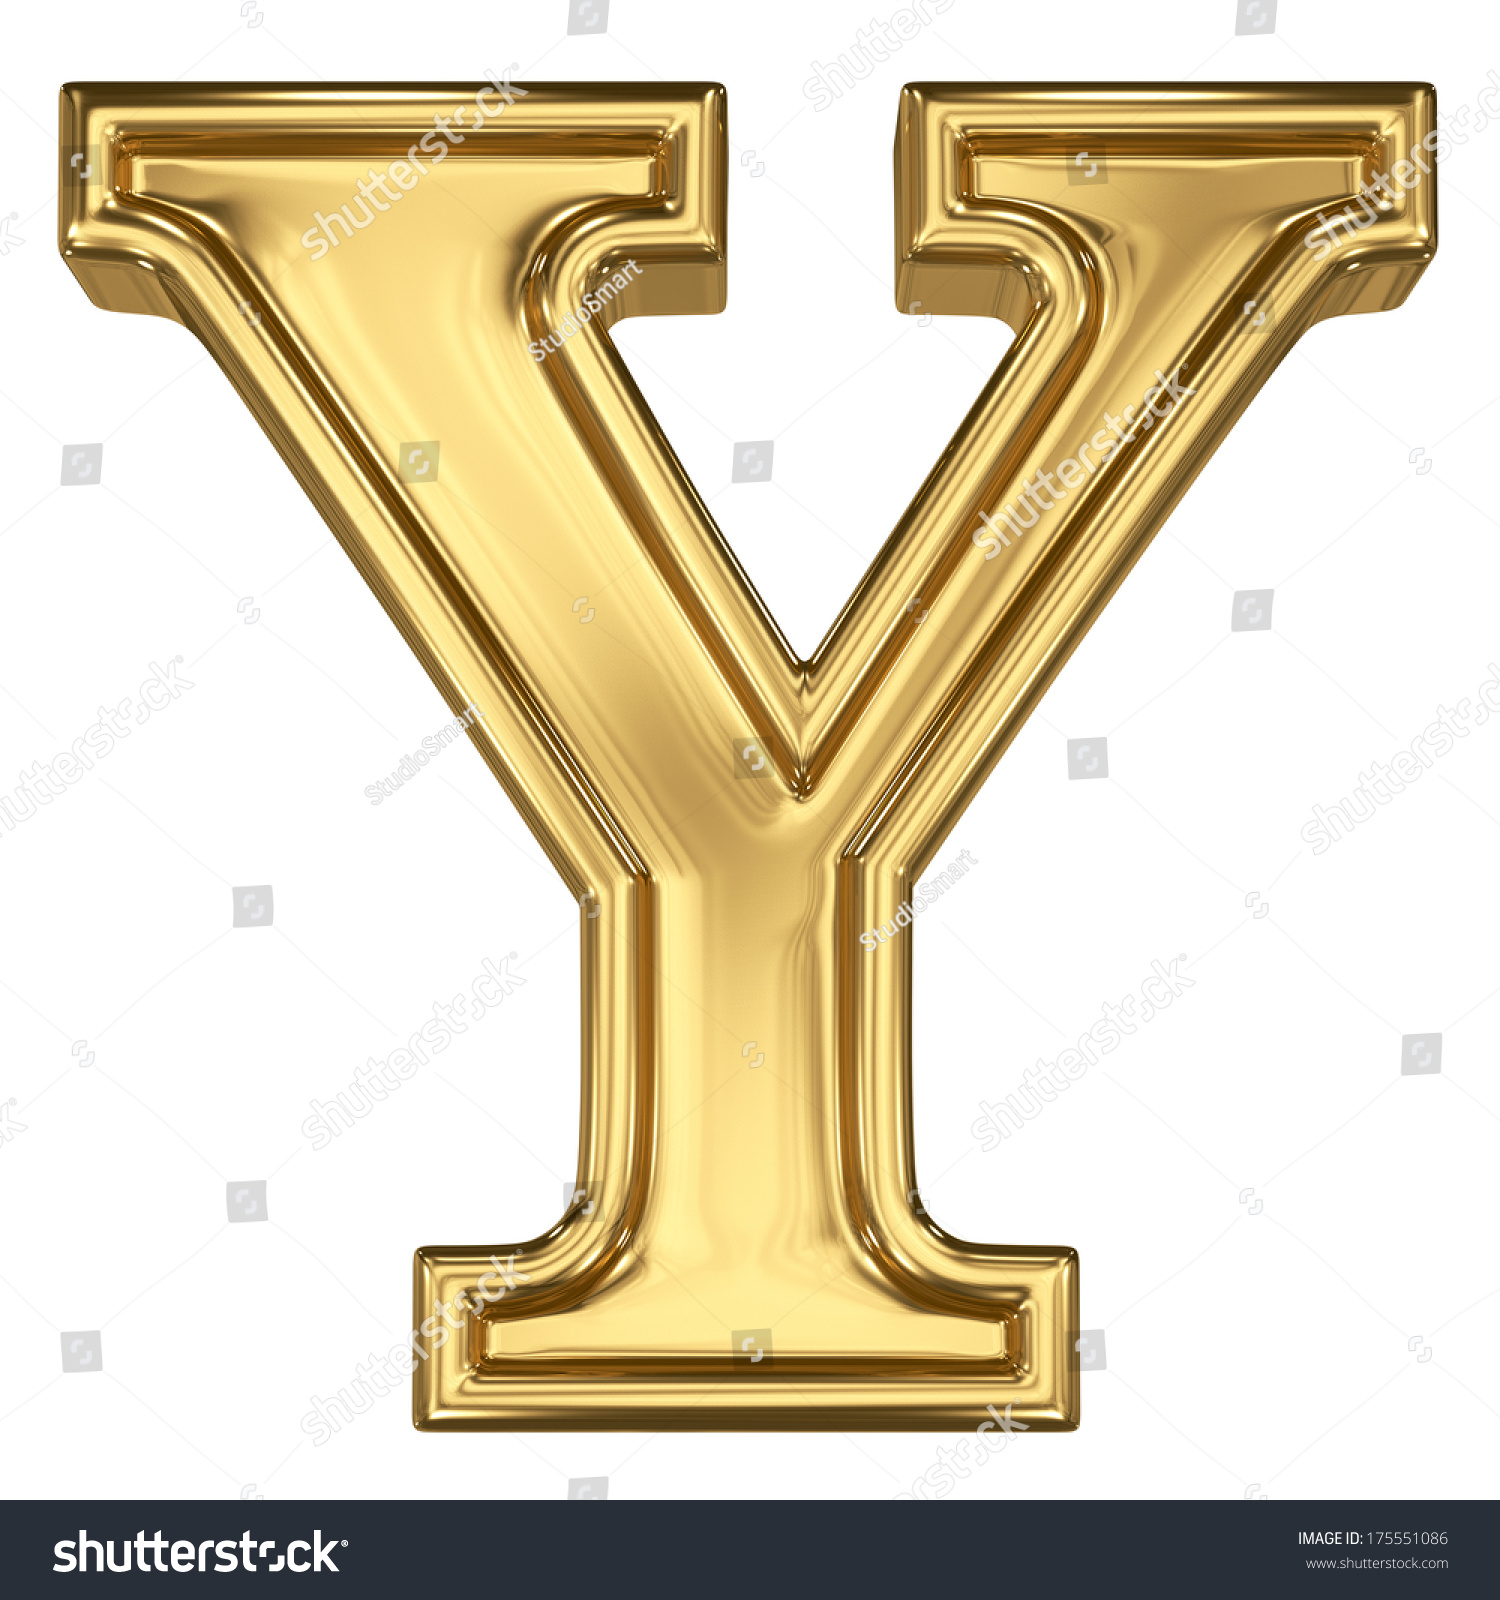 17,771 Solid gold letters Images, Stock Photos & Vectors | Shutterstock